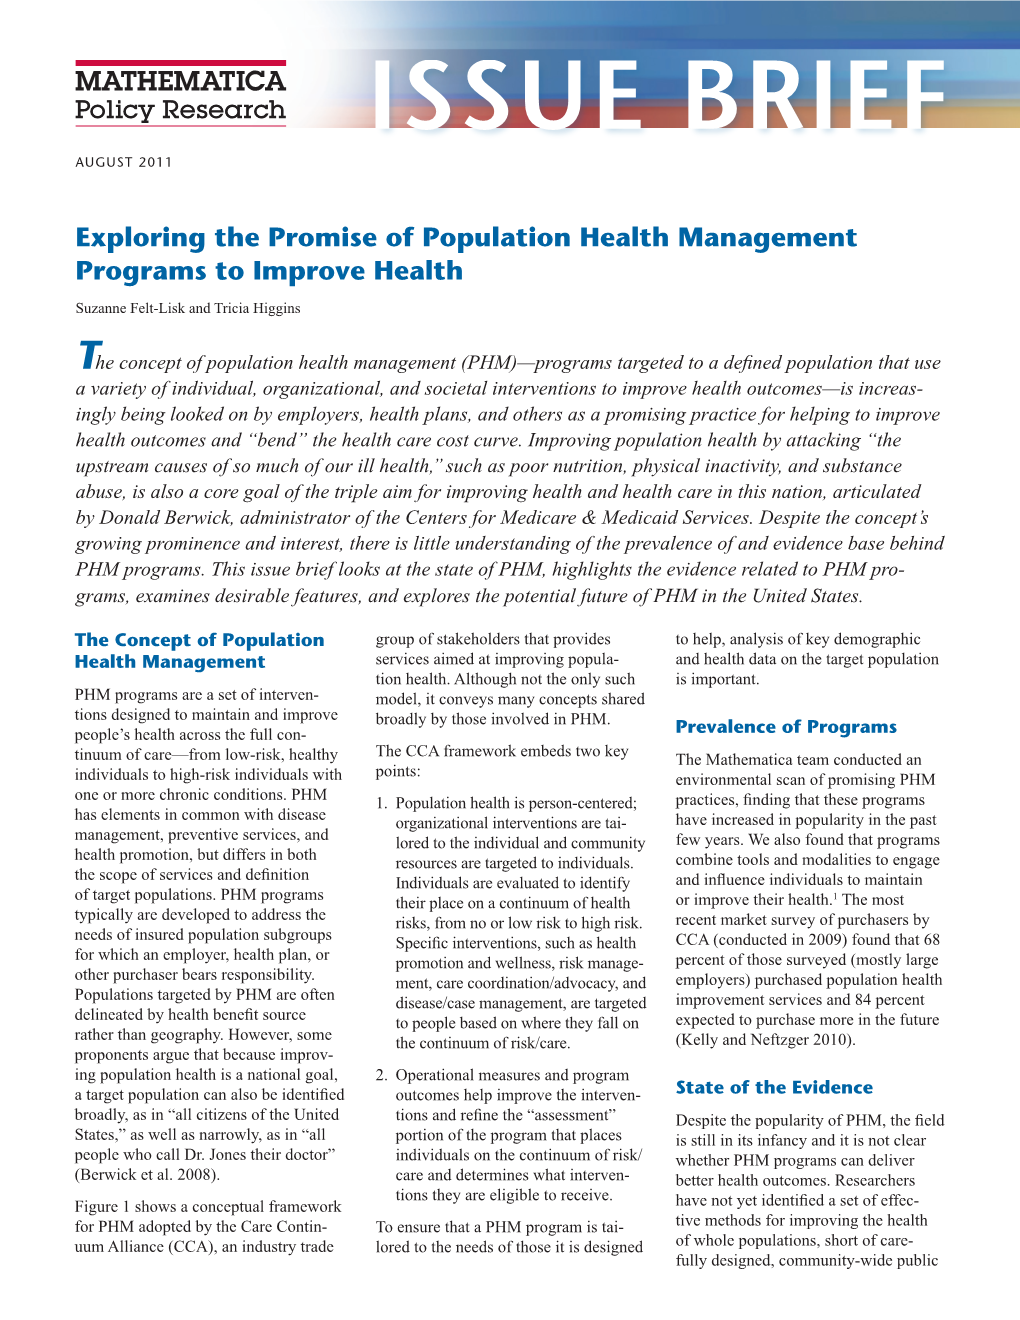 Exploring the Promise of Population Health Management Programs to Improve Health